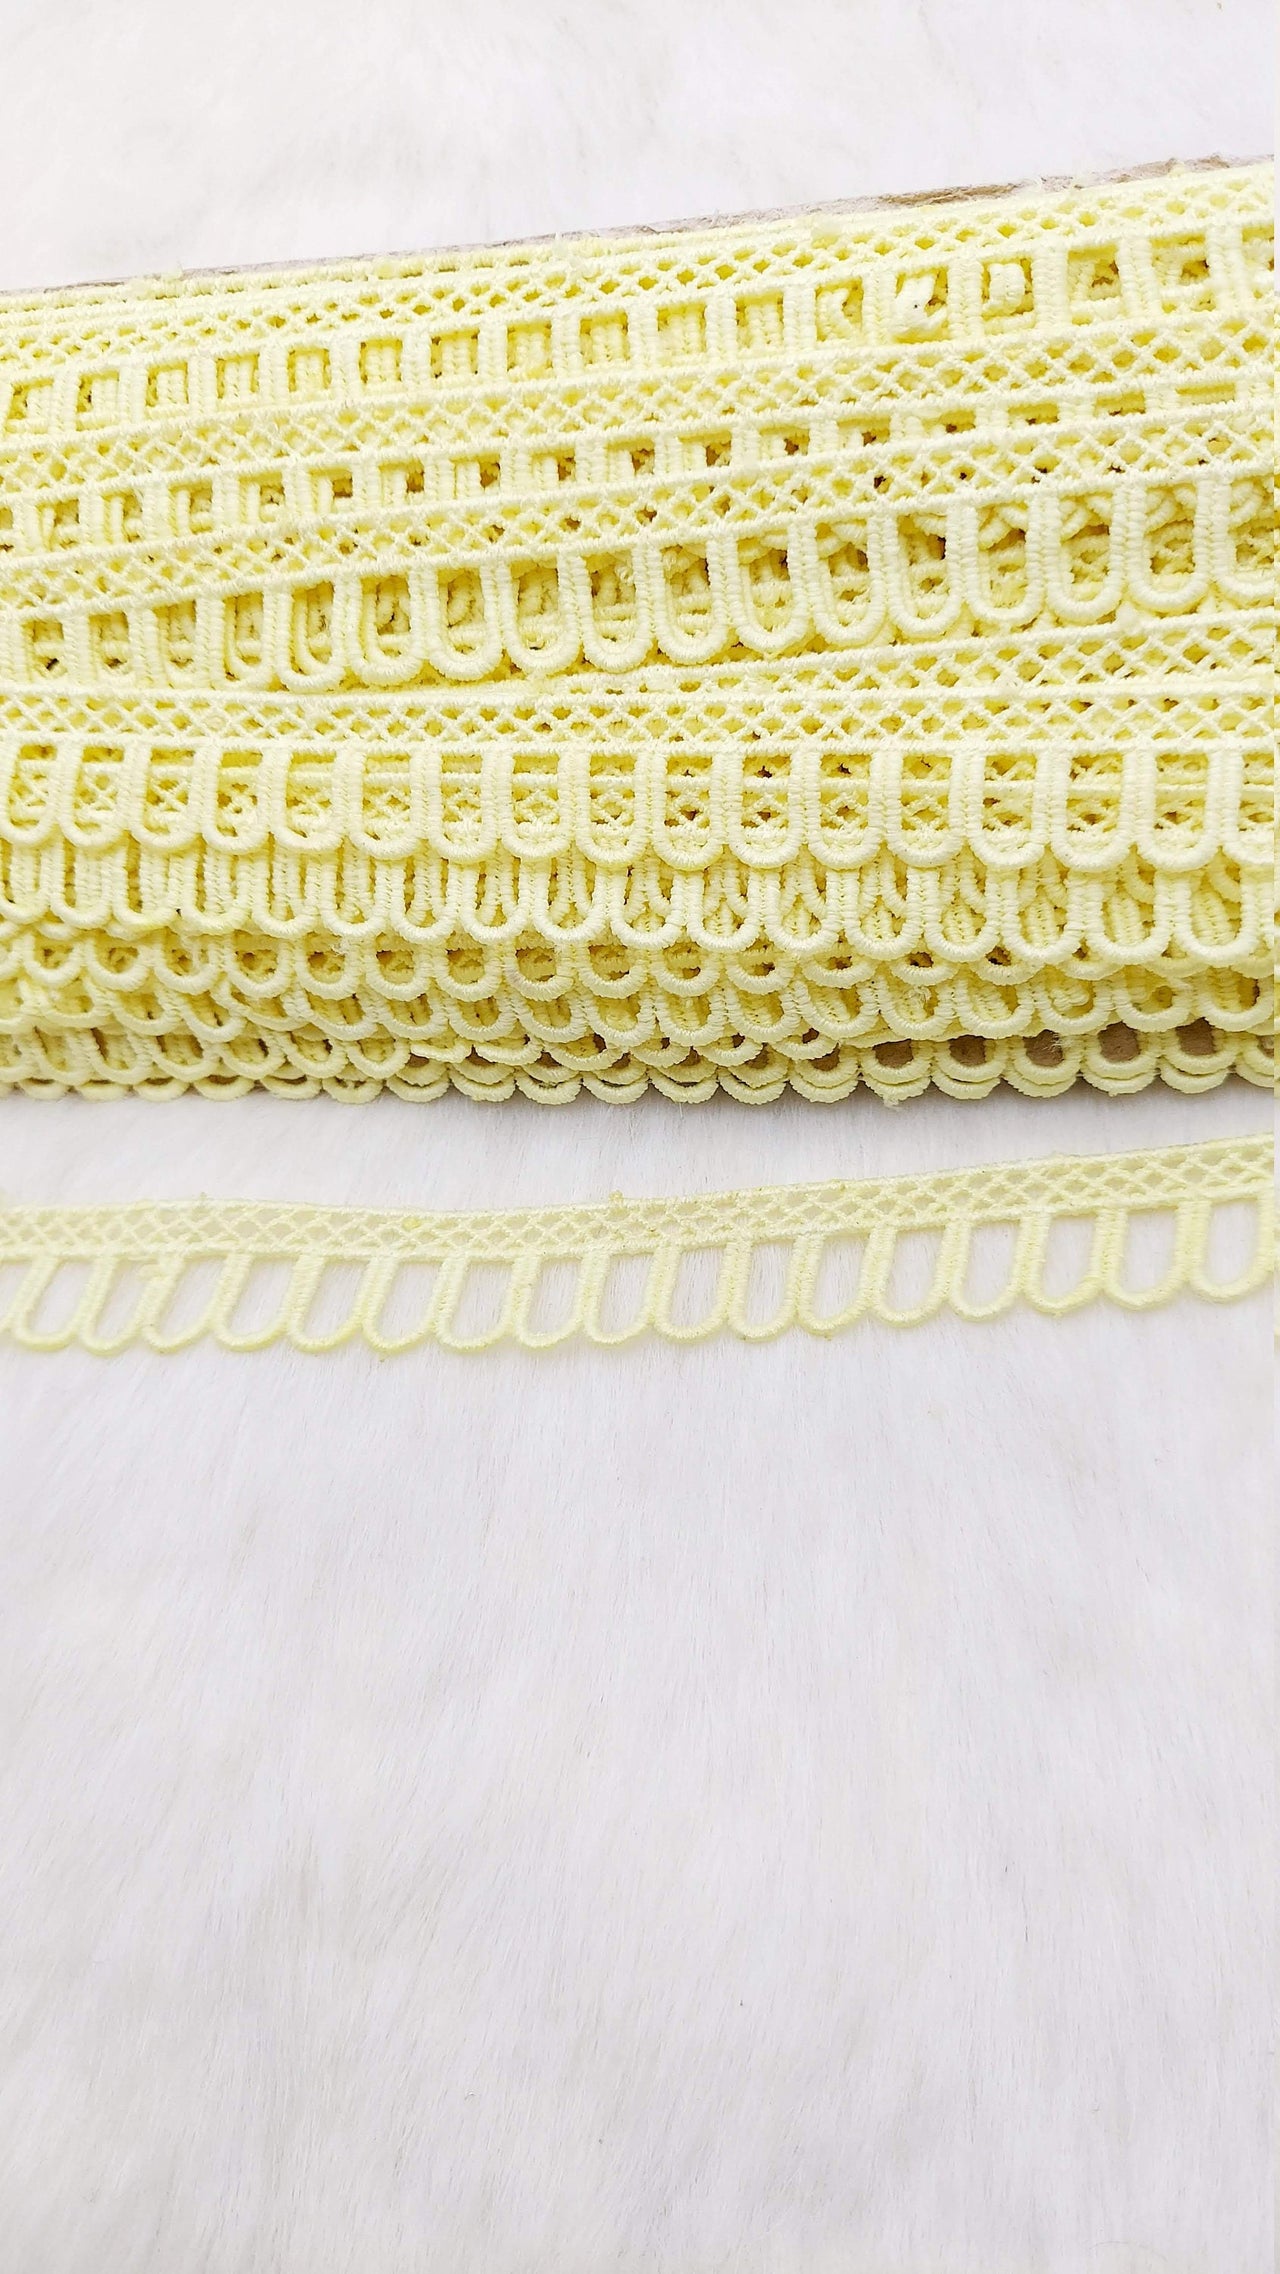 9 Yards Yellow Embroidery Cotton Lace Trim, Approx. 20mm Wide, Fringe Trim